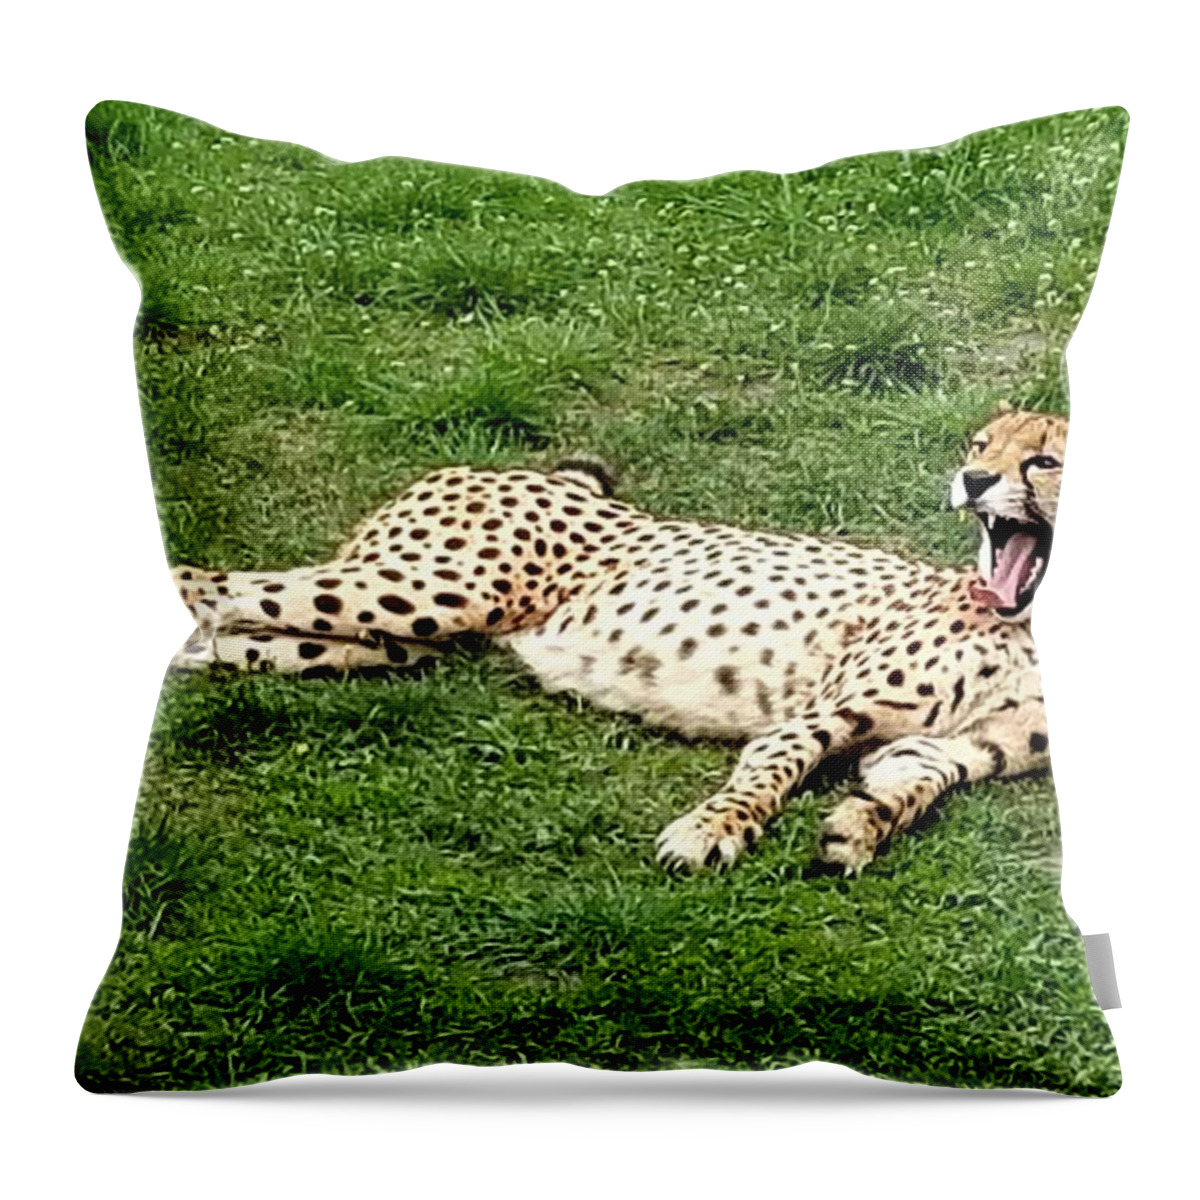 Sea Throw Pillow featuring the photograph Lounging Cheetah by Michael Graham